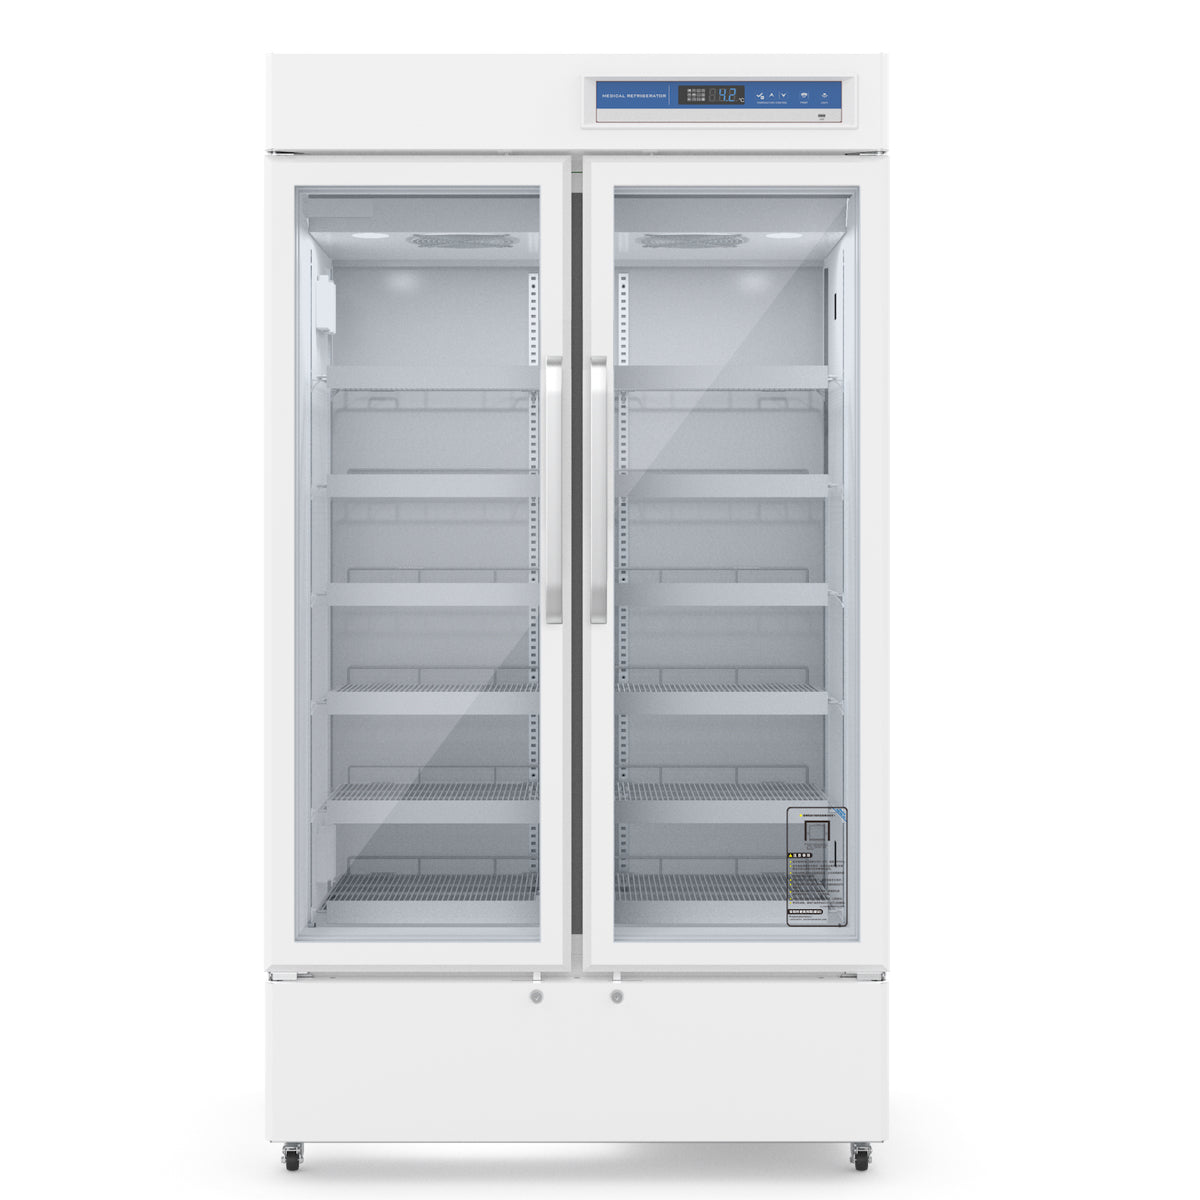 A white medical refrigerator with glass doors and adjustable shelves, providing 1015L of storage capacity. Temperature range: 2℃～8℃.